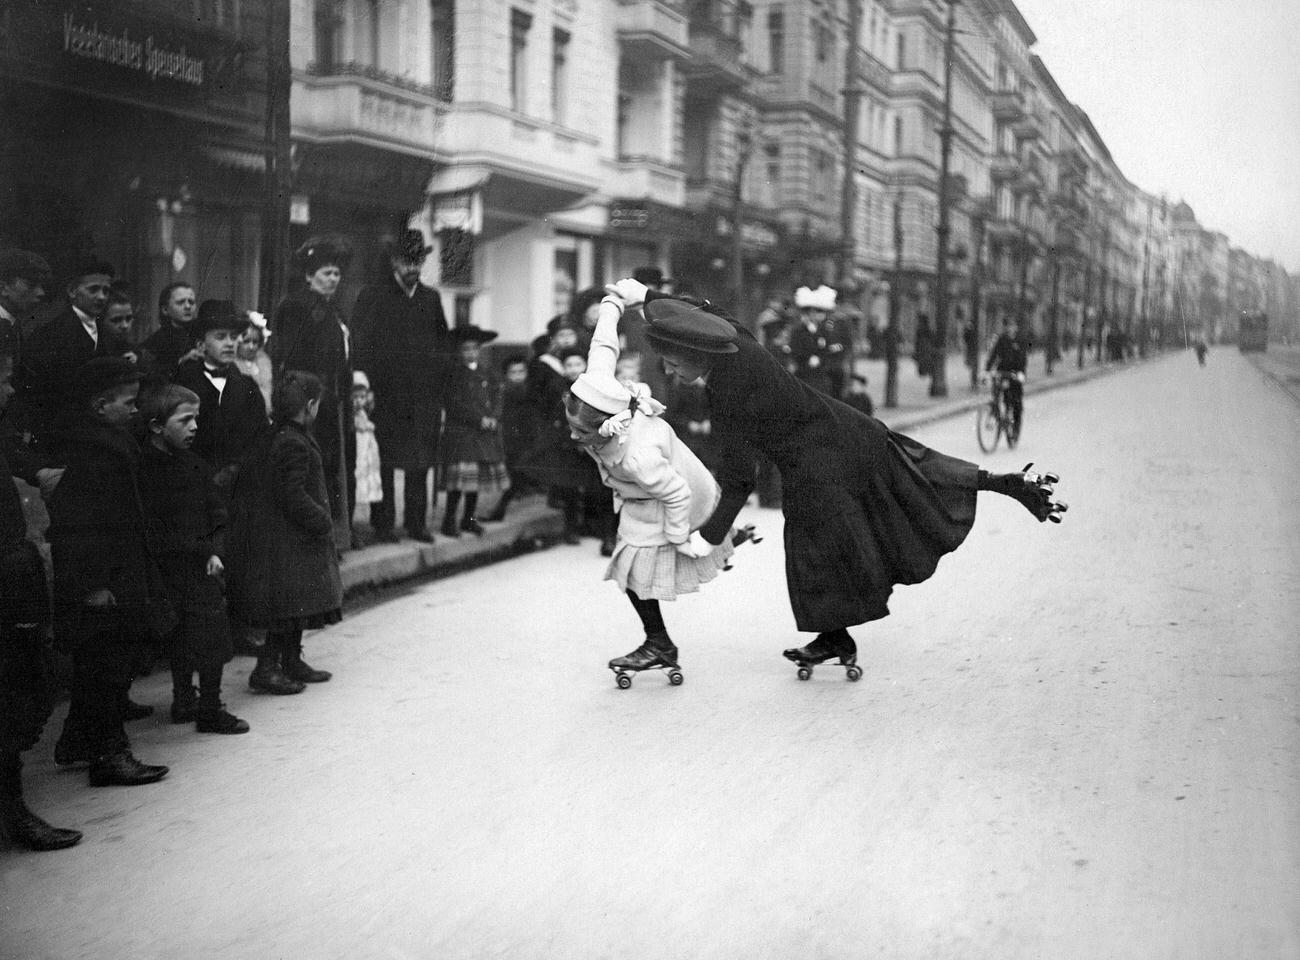 A Woman and Girl Pair-Skating on Berlin Streets, 1910.